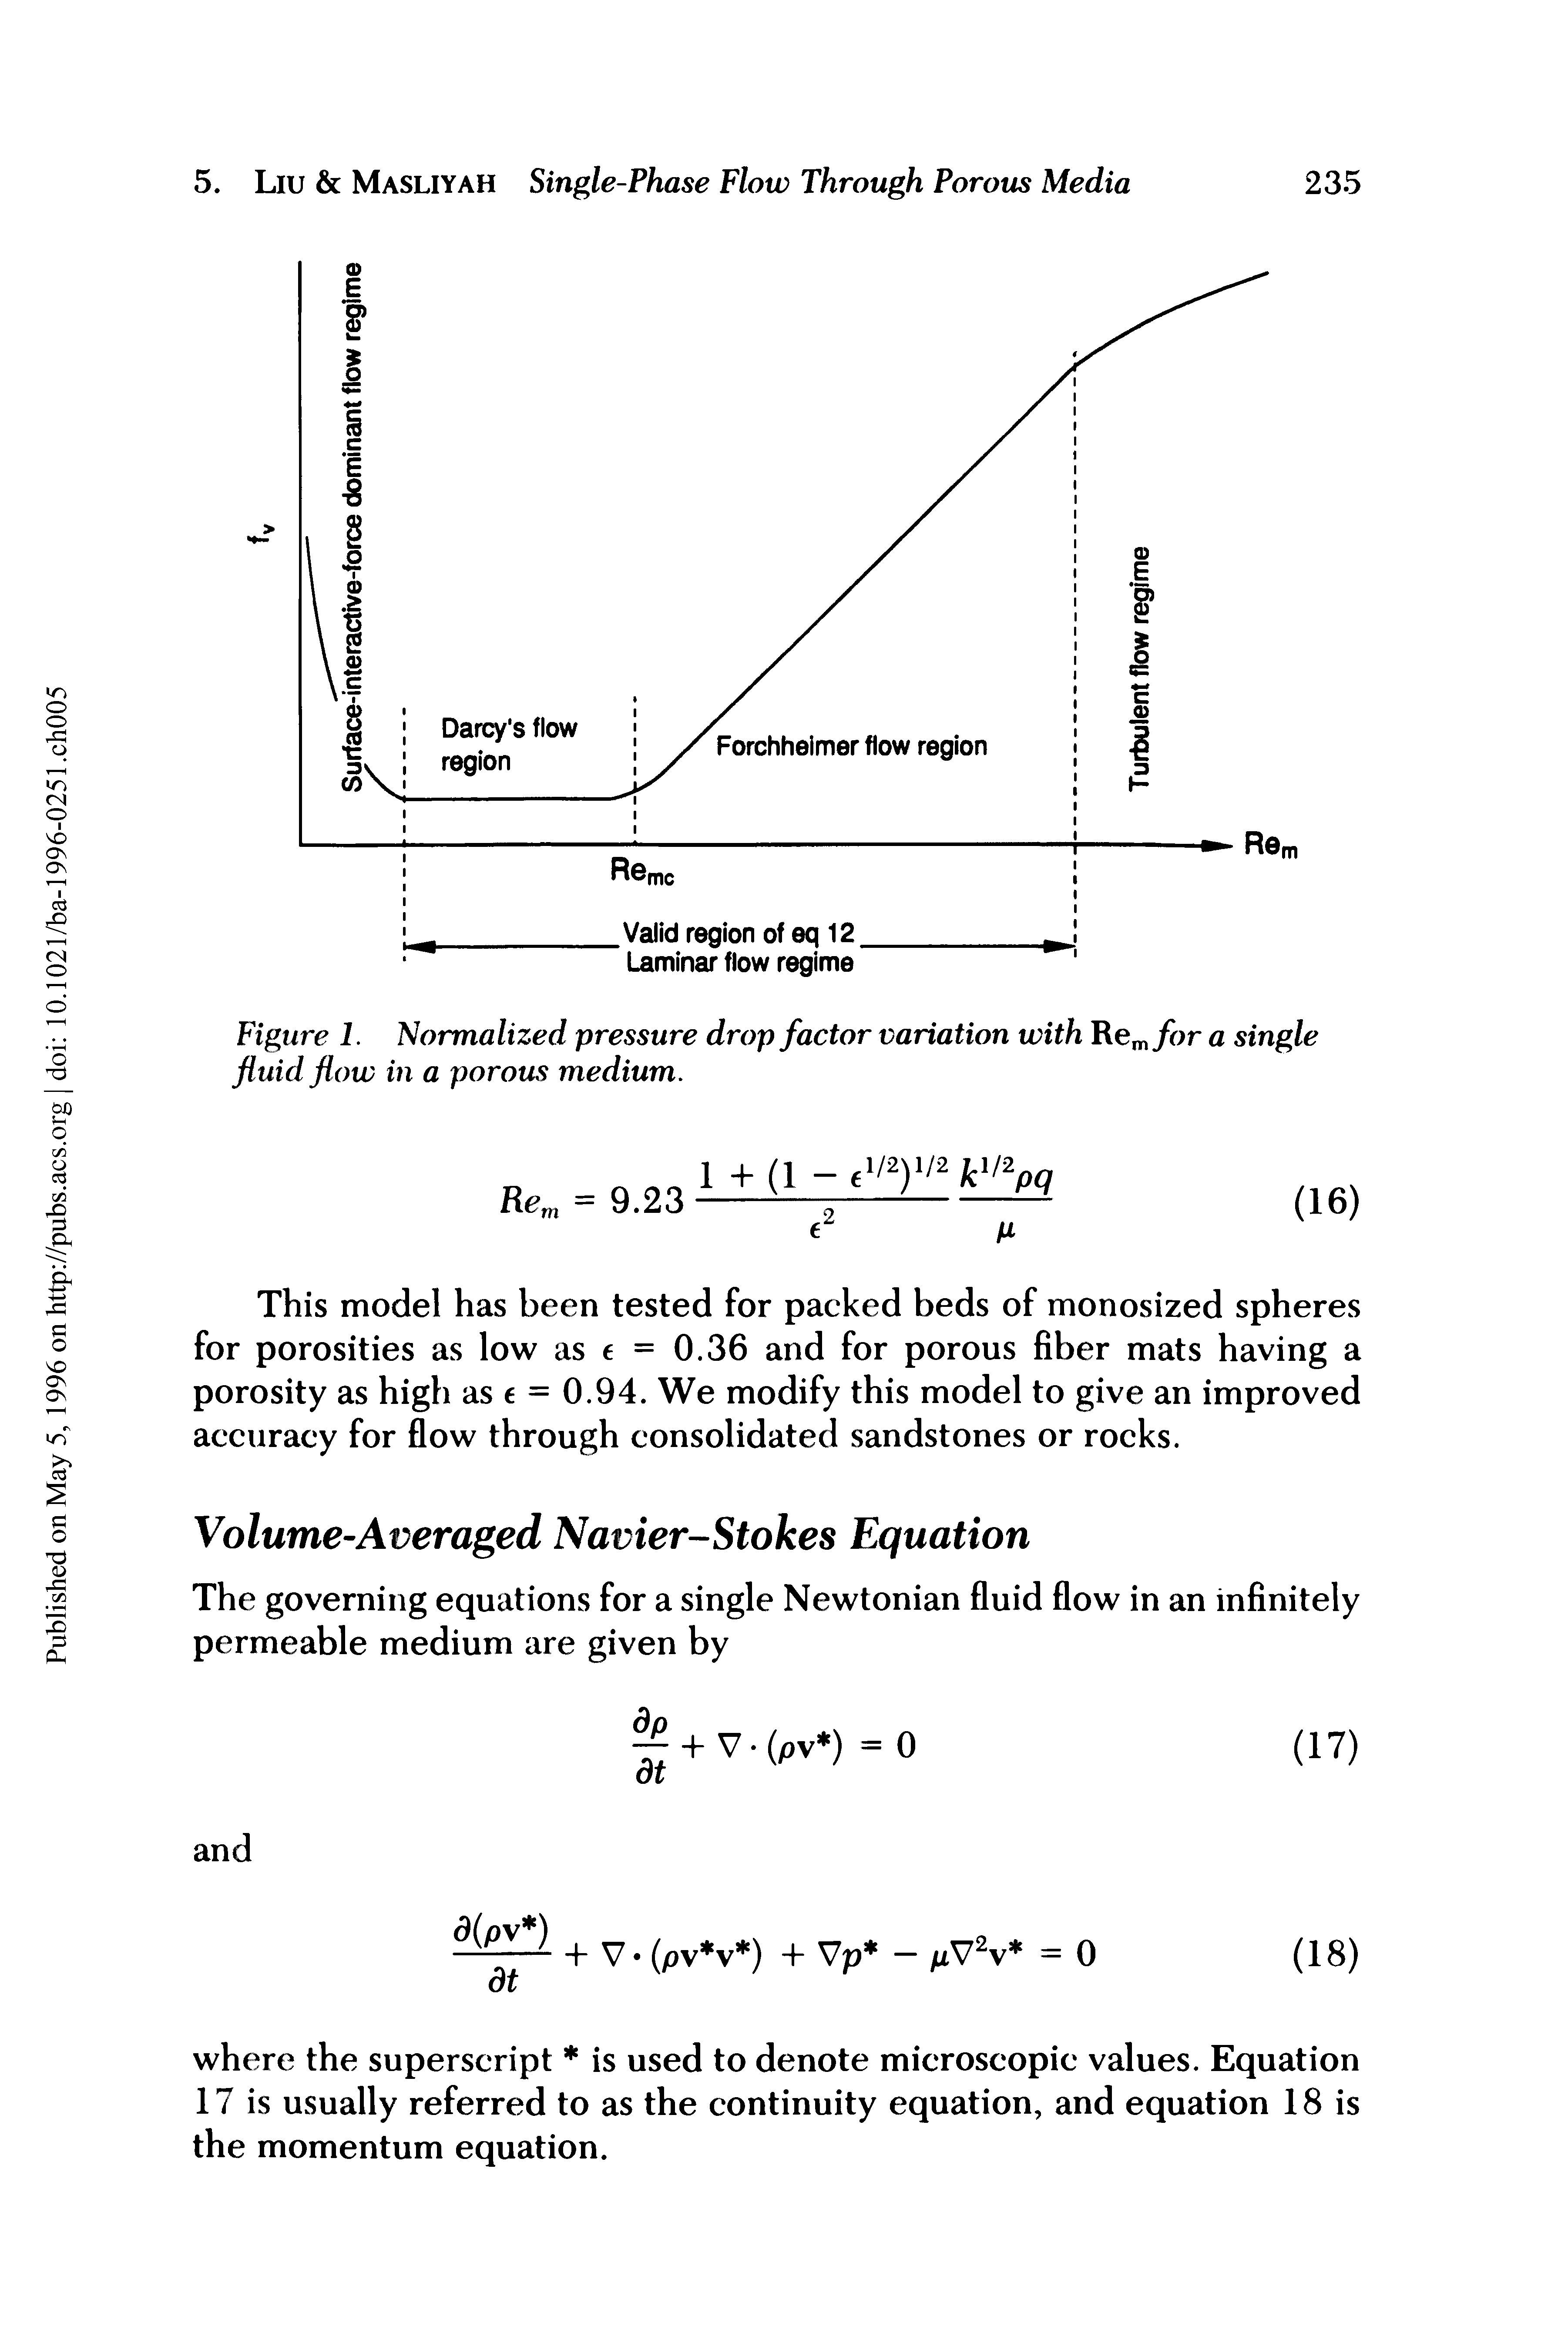 Figure 1. Normalized pressure drop factor variation with Remfor a single fluid flow in a porous medium.